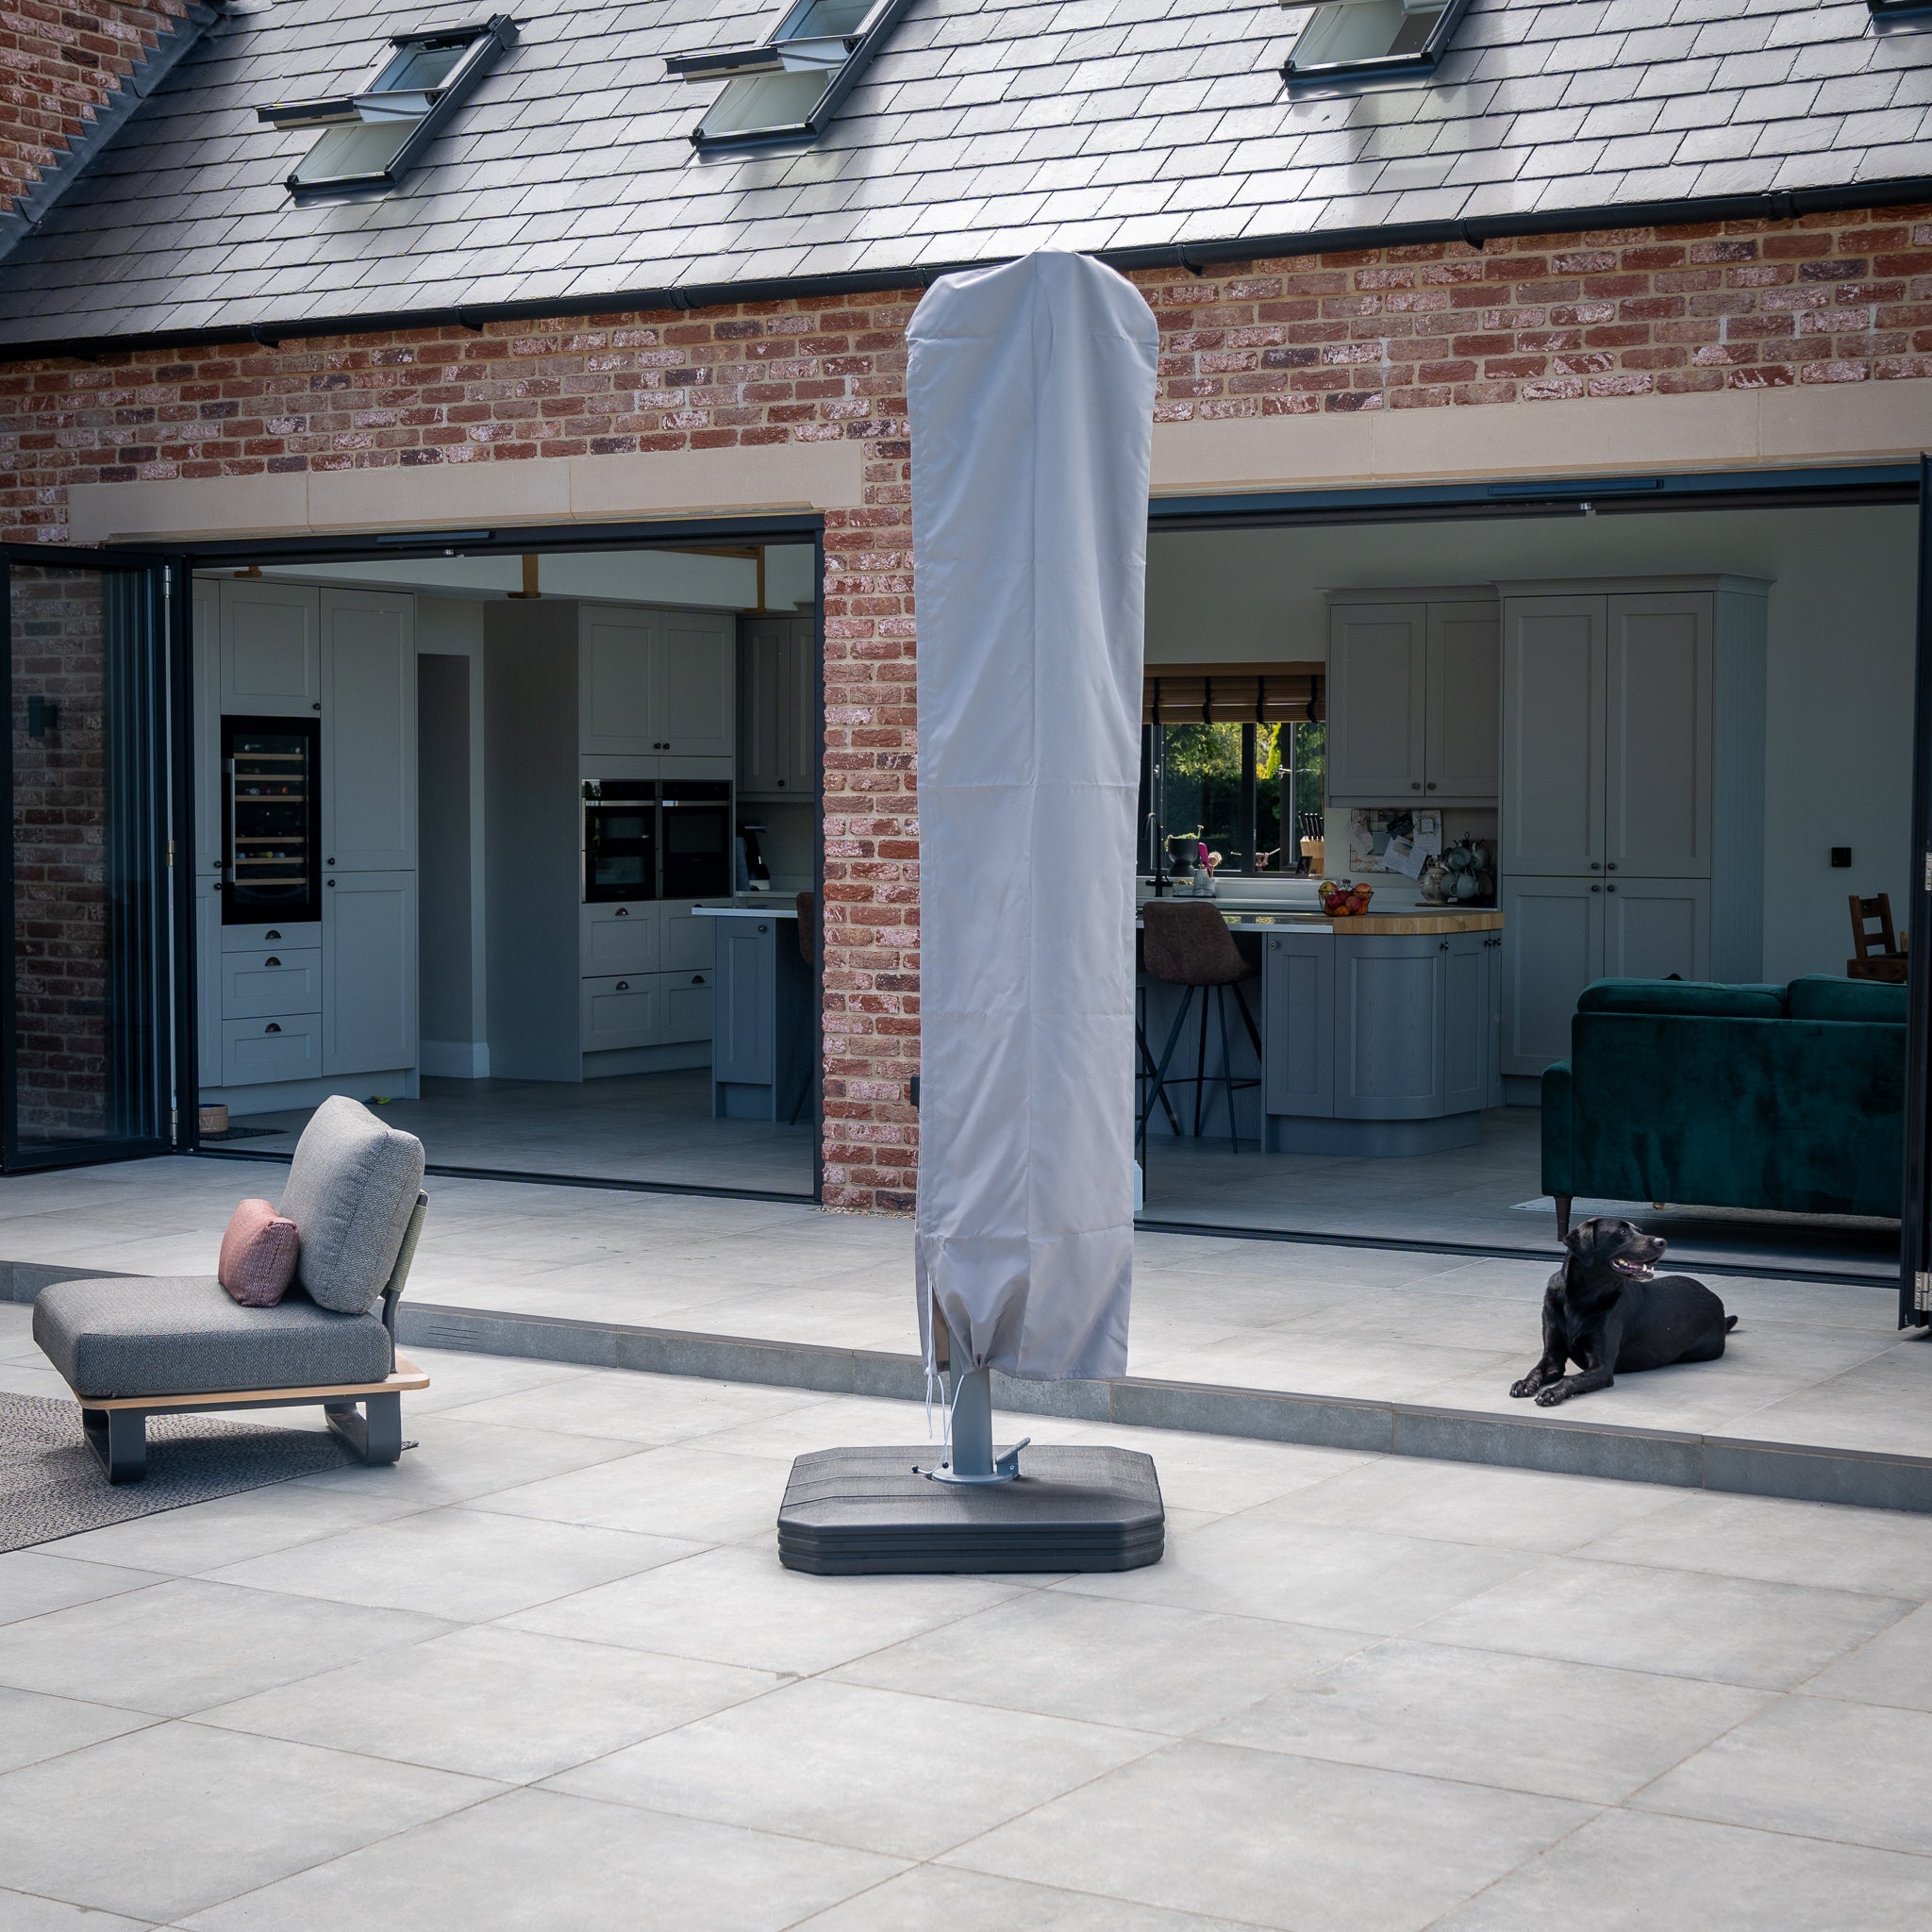 Ares 3.5m Round Cantilever Parasol with Solar powered LED Lights in Charcoal